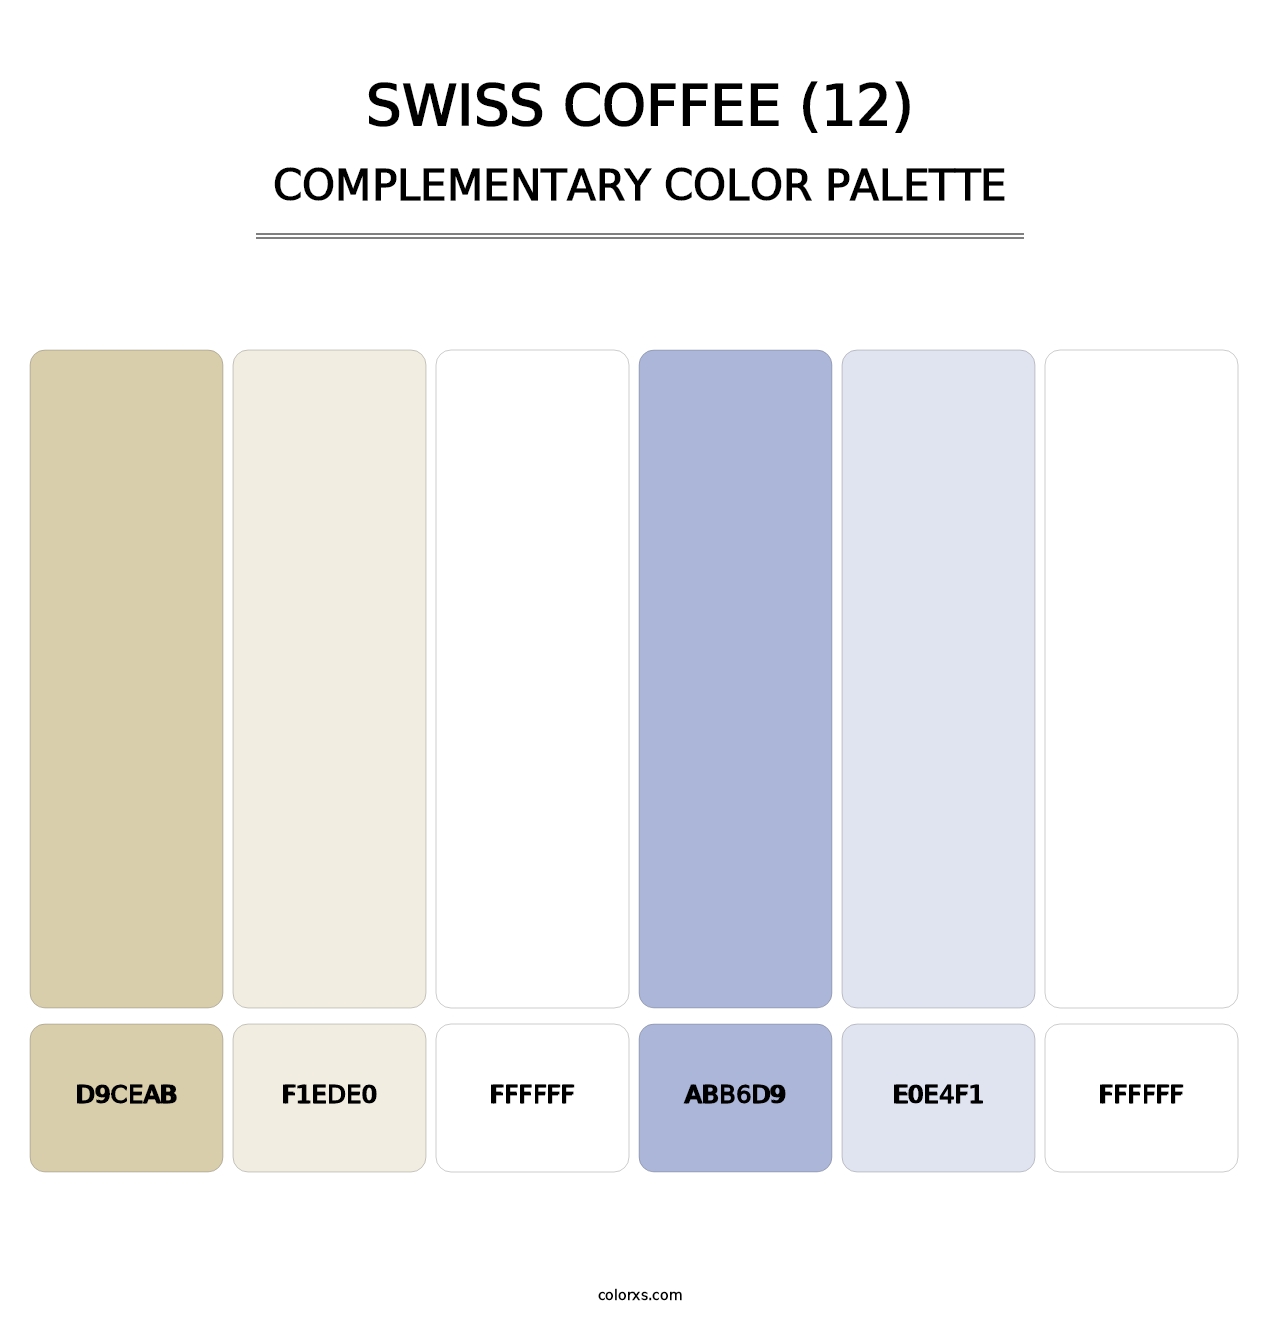 Swiss Coffee (12) - Complementary Color Palette